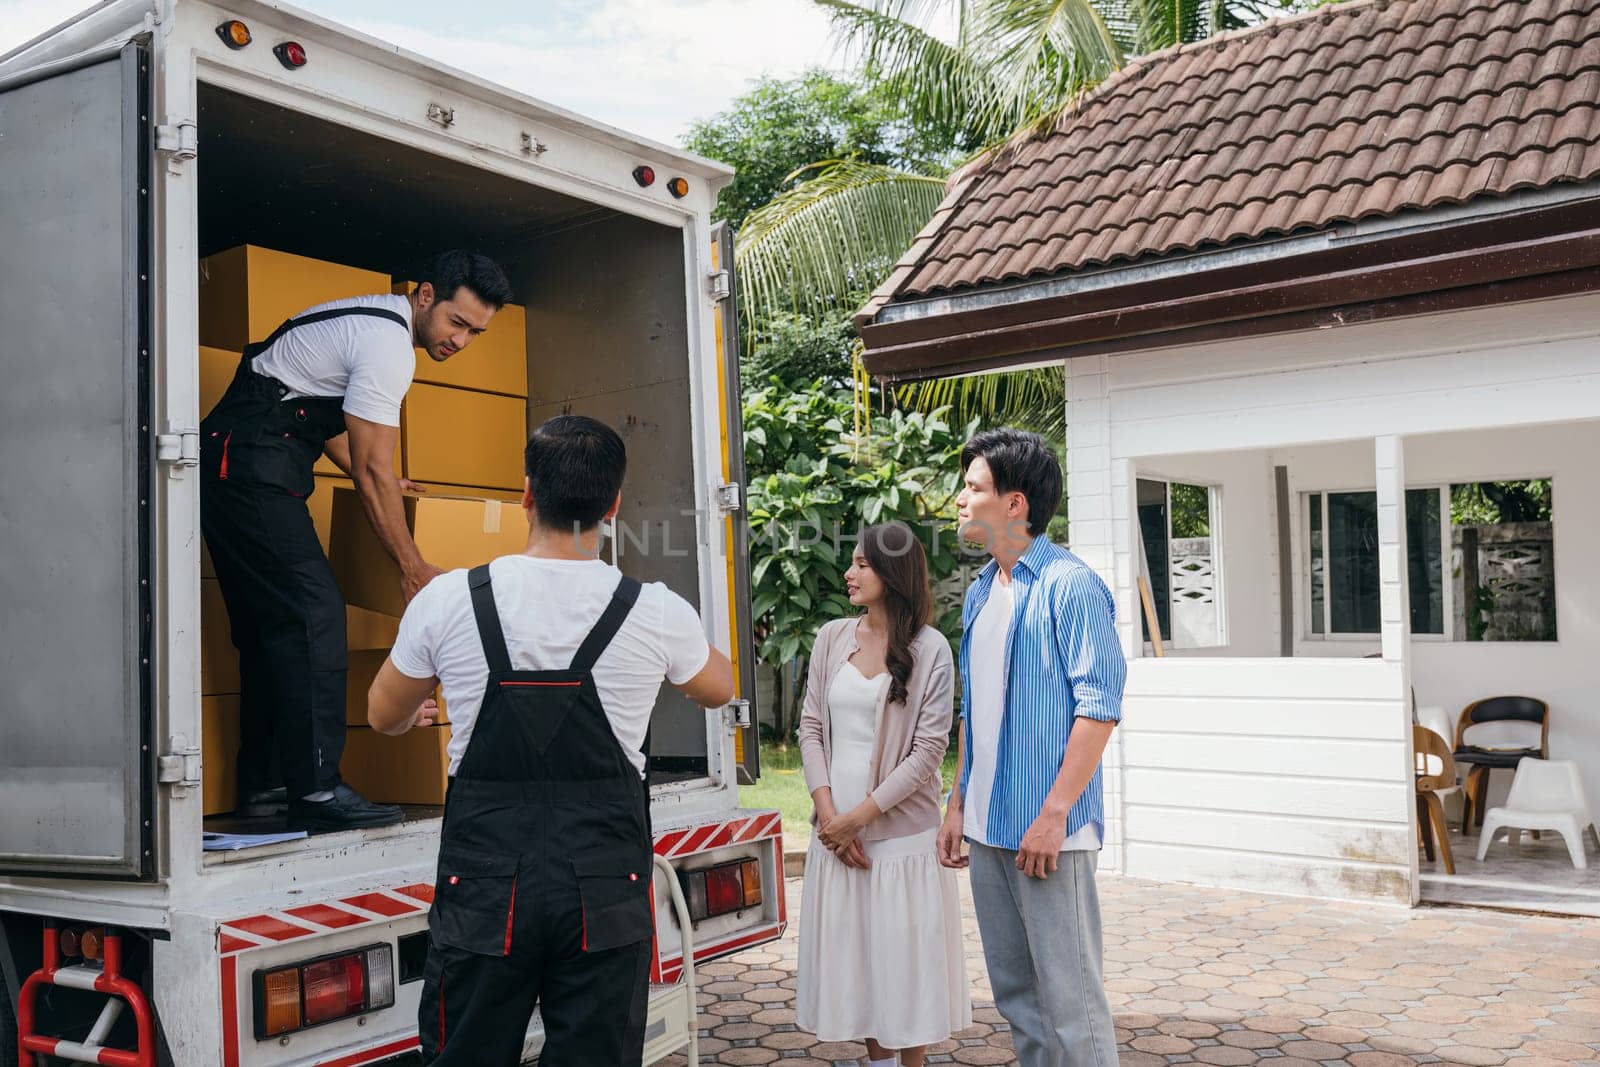 A couple receives professional assistance in moving to their new house. The teamwork of employees is evident as they unload and lift cardboard boxes during the relocation. Moving Day Concept by Sorapop